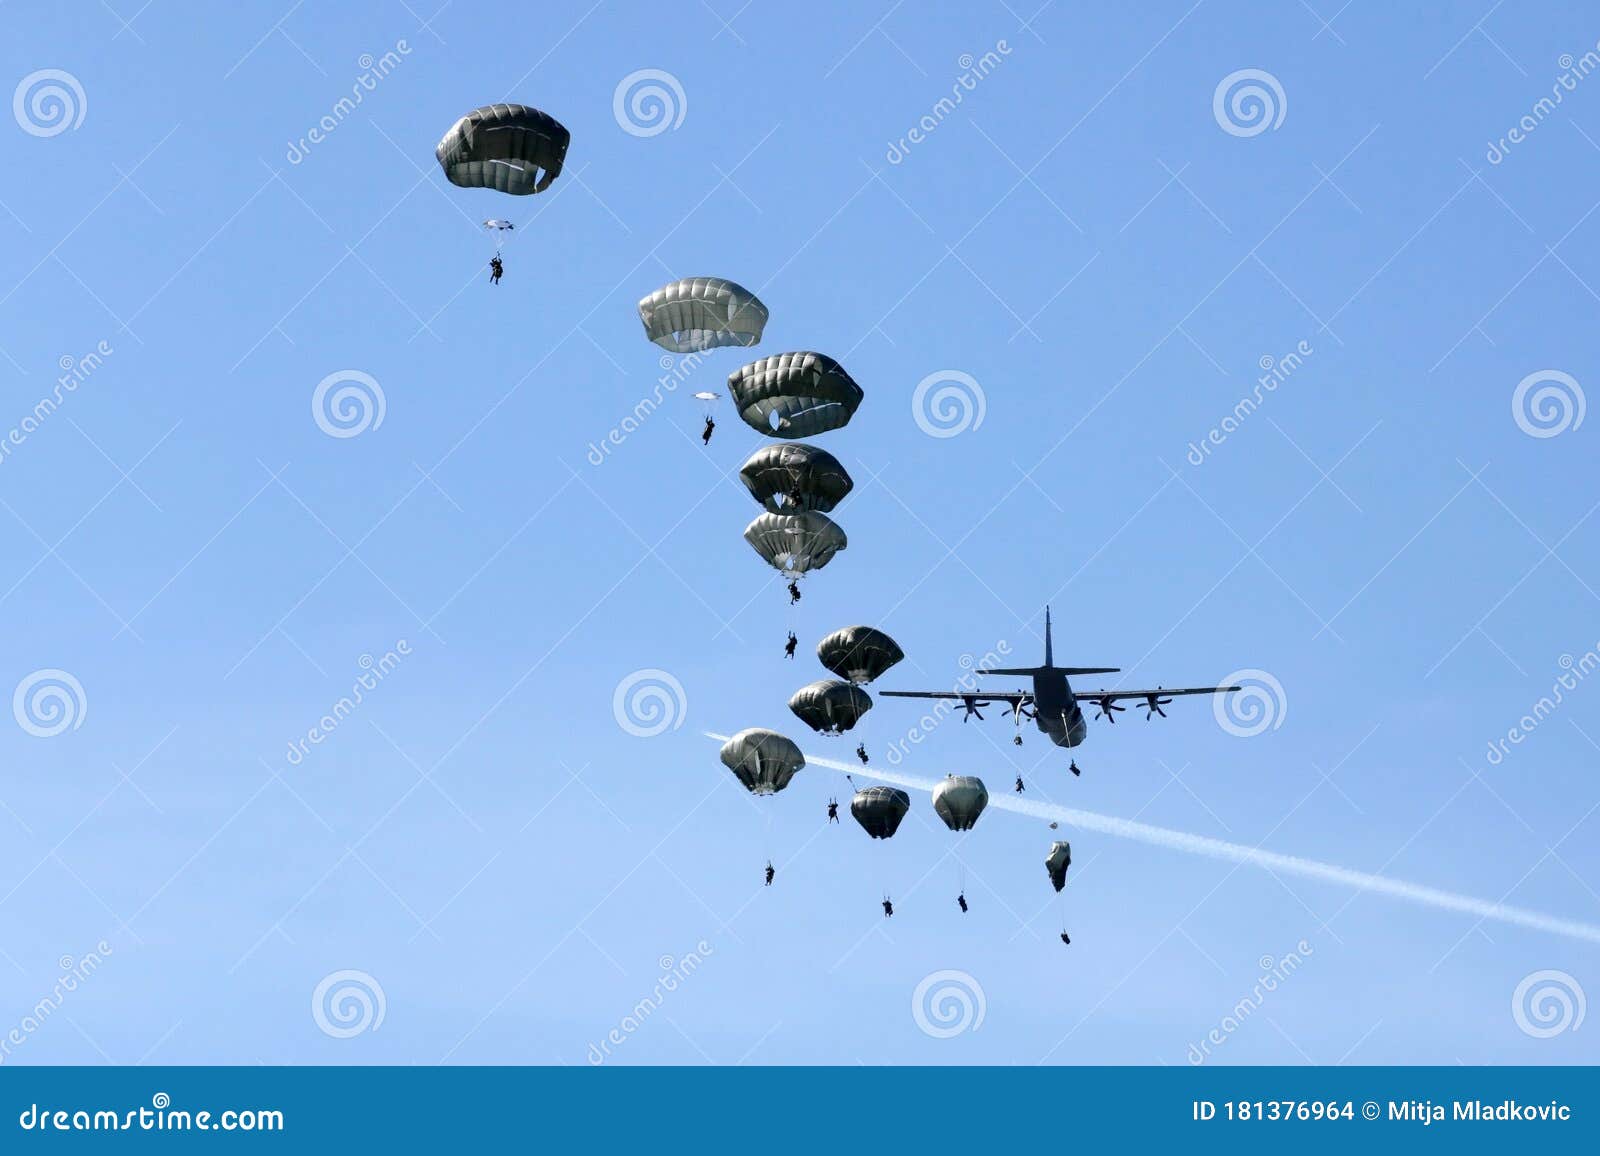 army paratroopers in jump of the plane.